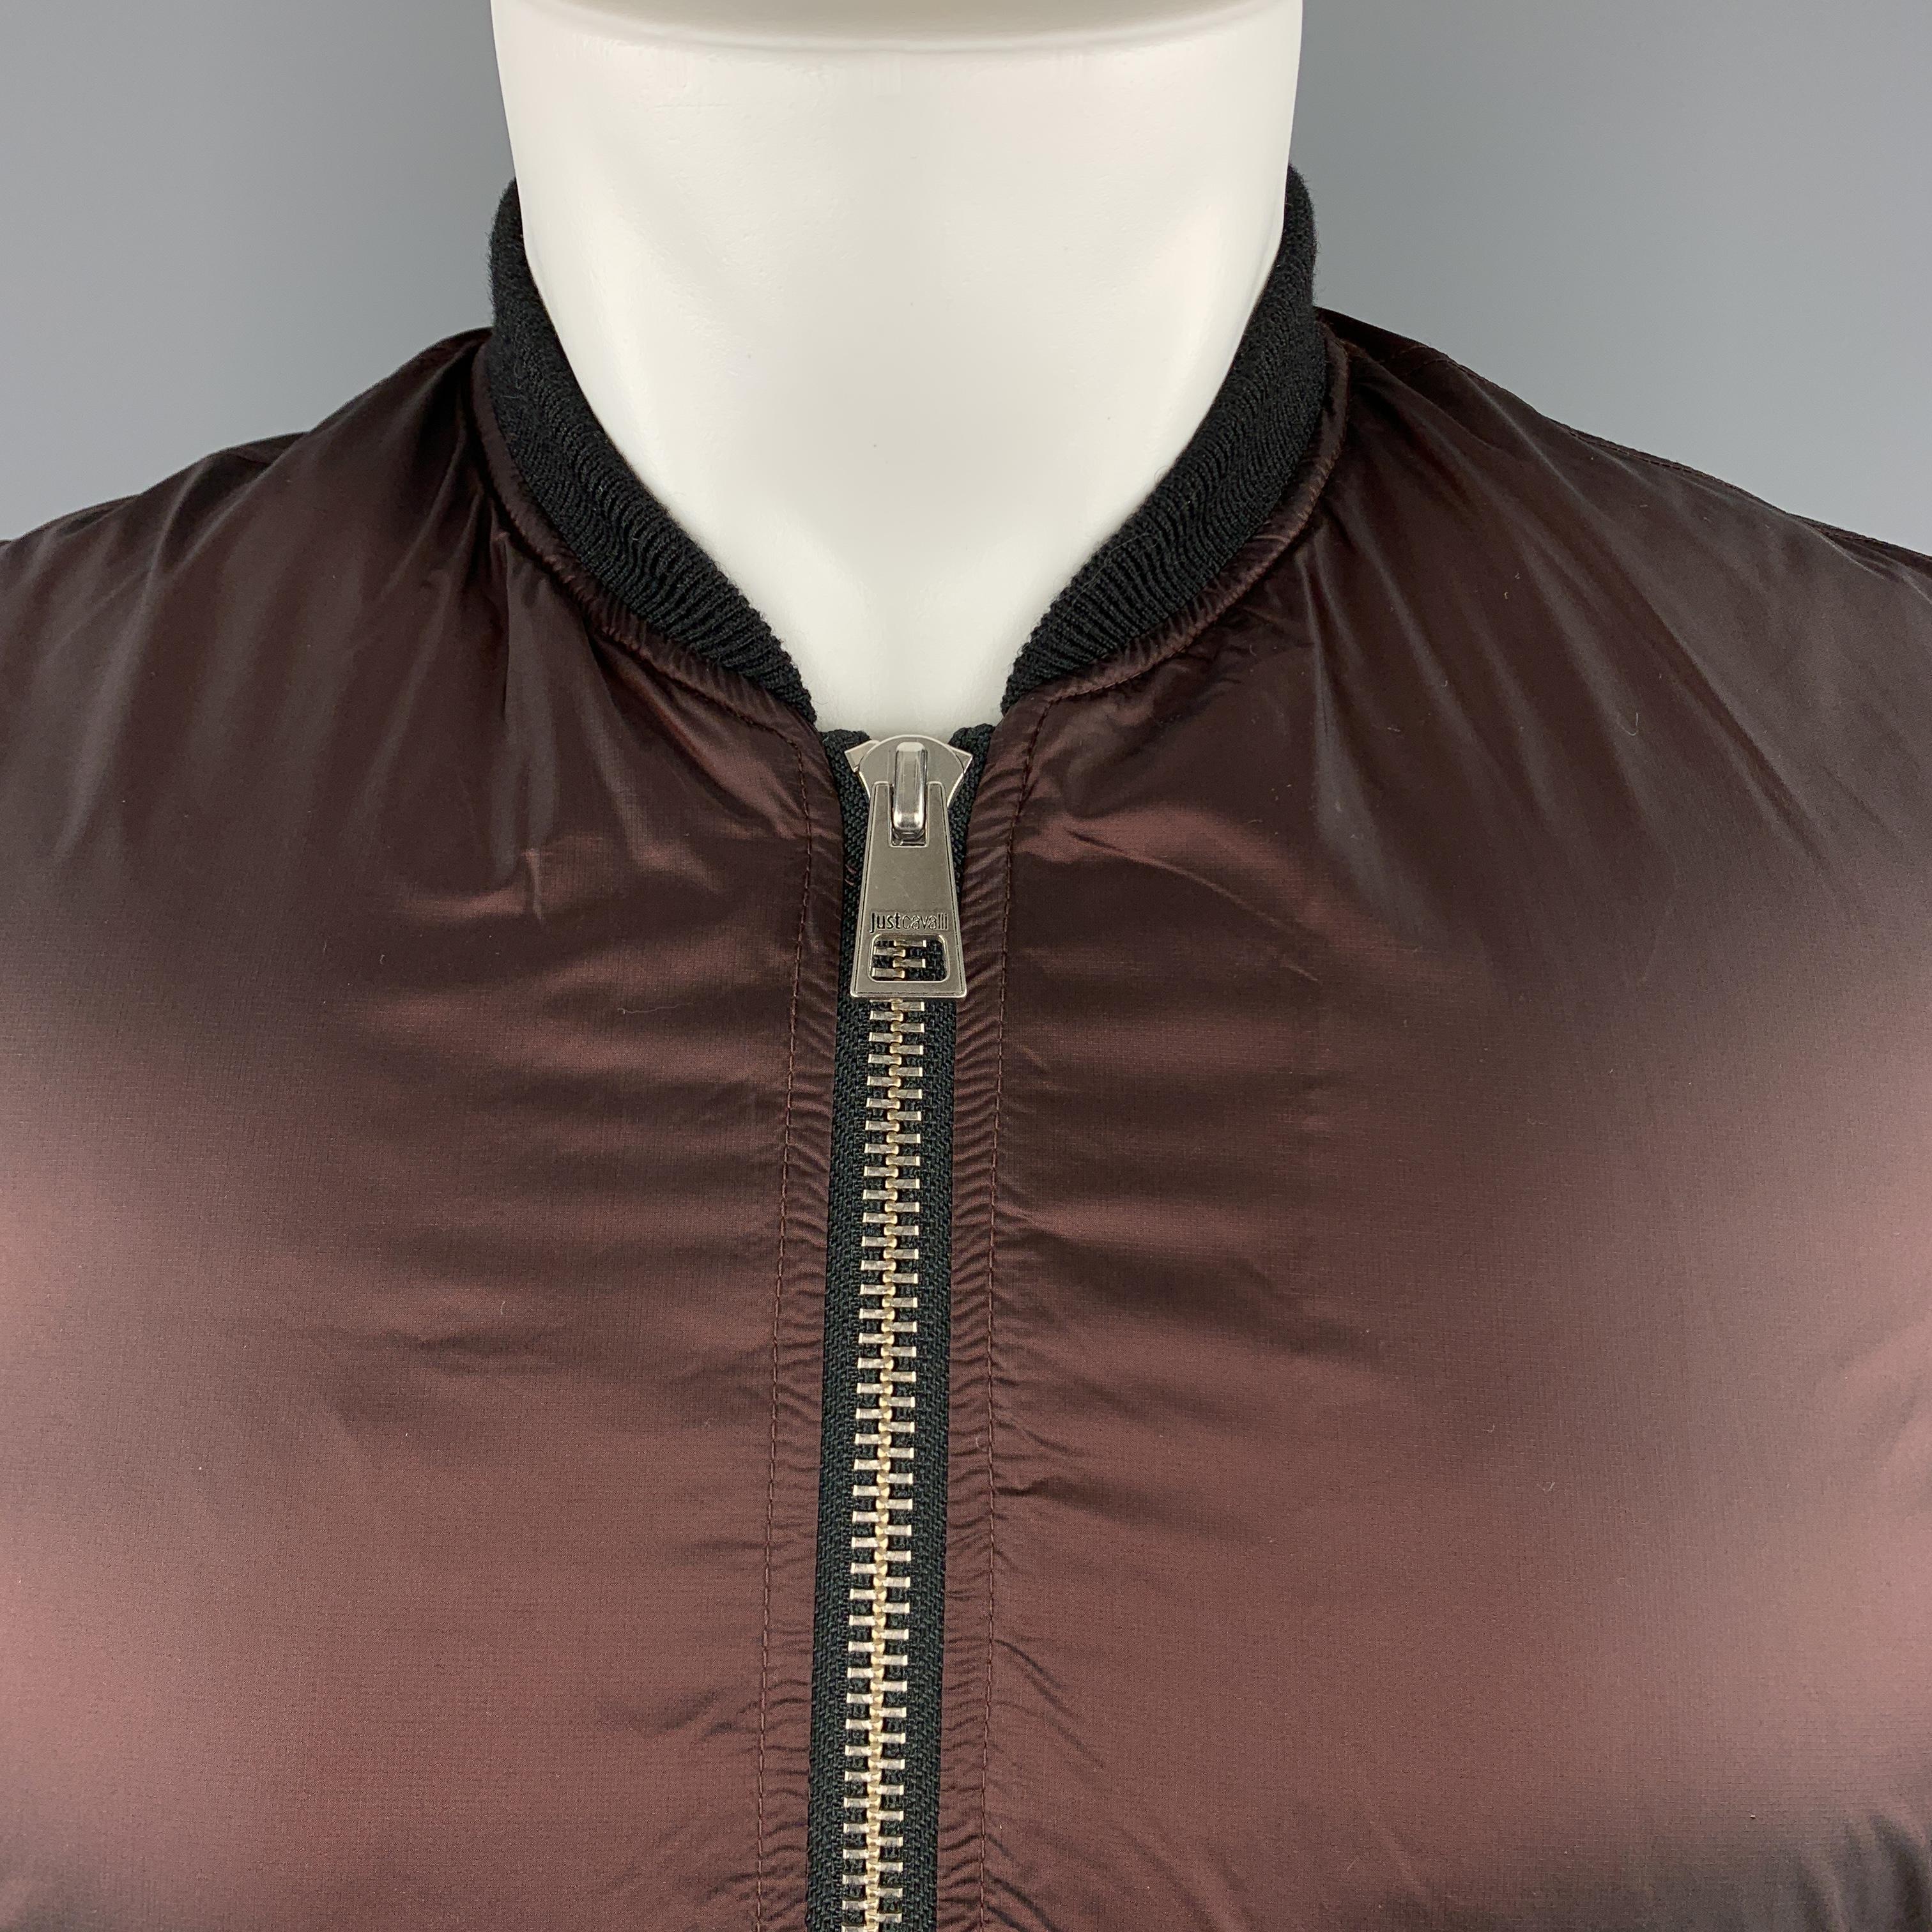 JUST CAVALLI bomber flight jacket comes in a iridescent sheen deep burgundy brown fabric with a black baseball collar and zip up front. 

Excellent Pre-Owned Condition.
Marked: IT 48

Measurements:

Shoulder: 17 in.
Chest: 44 in.
Sleeve: 26